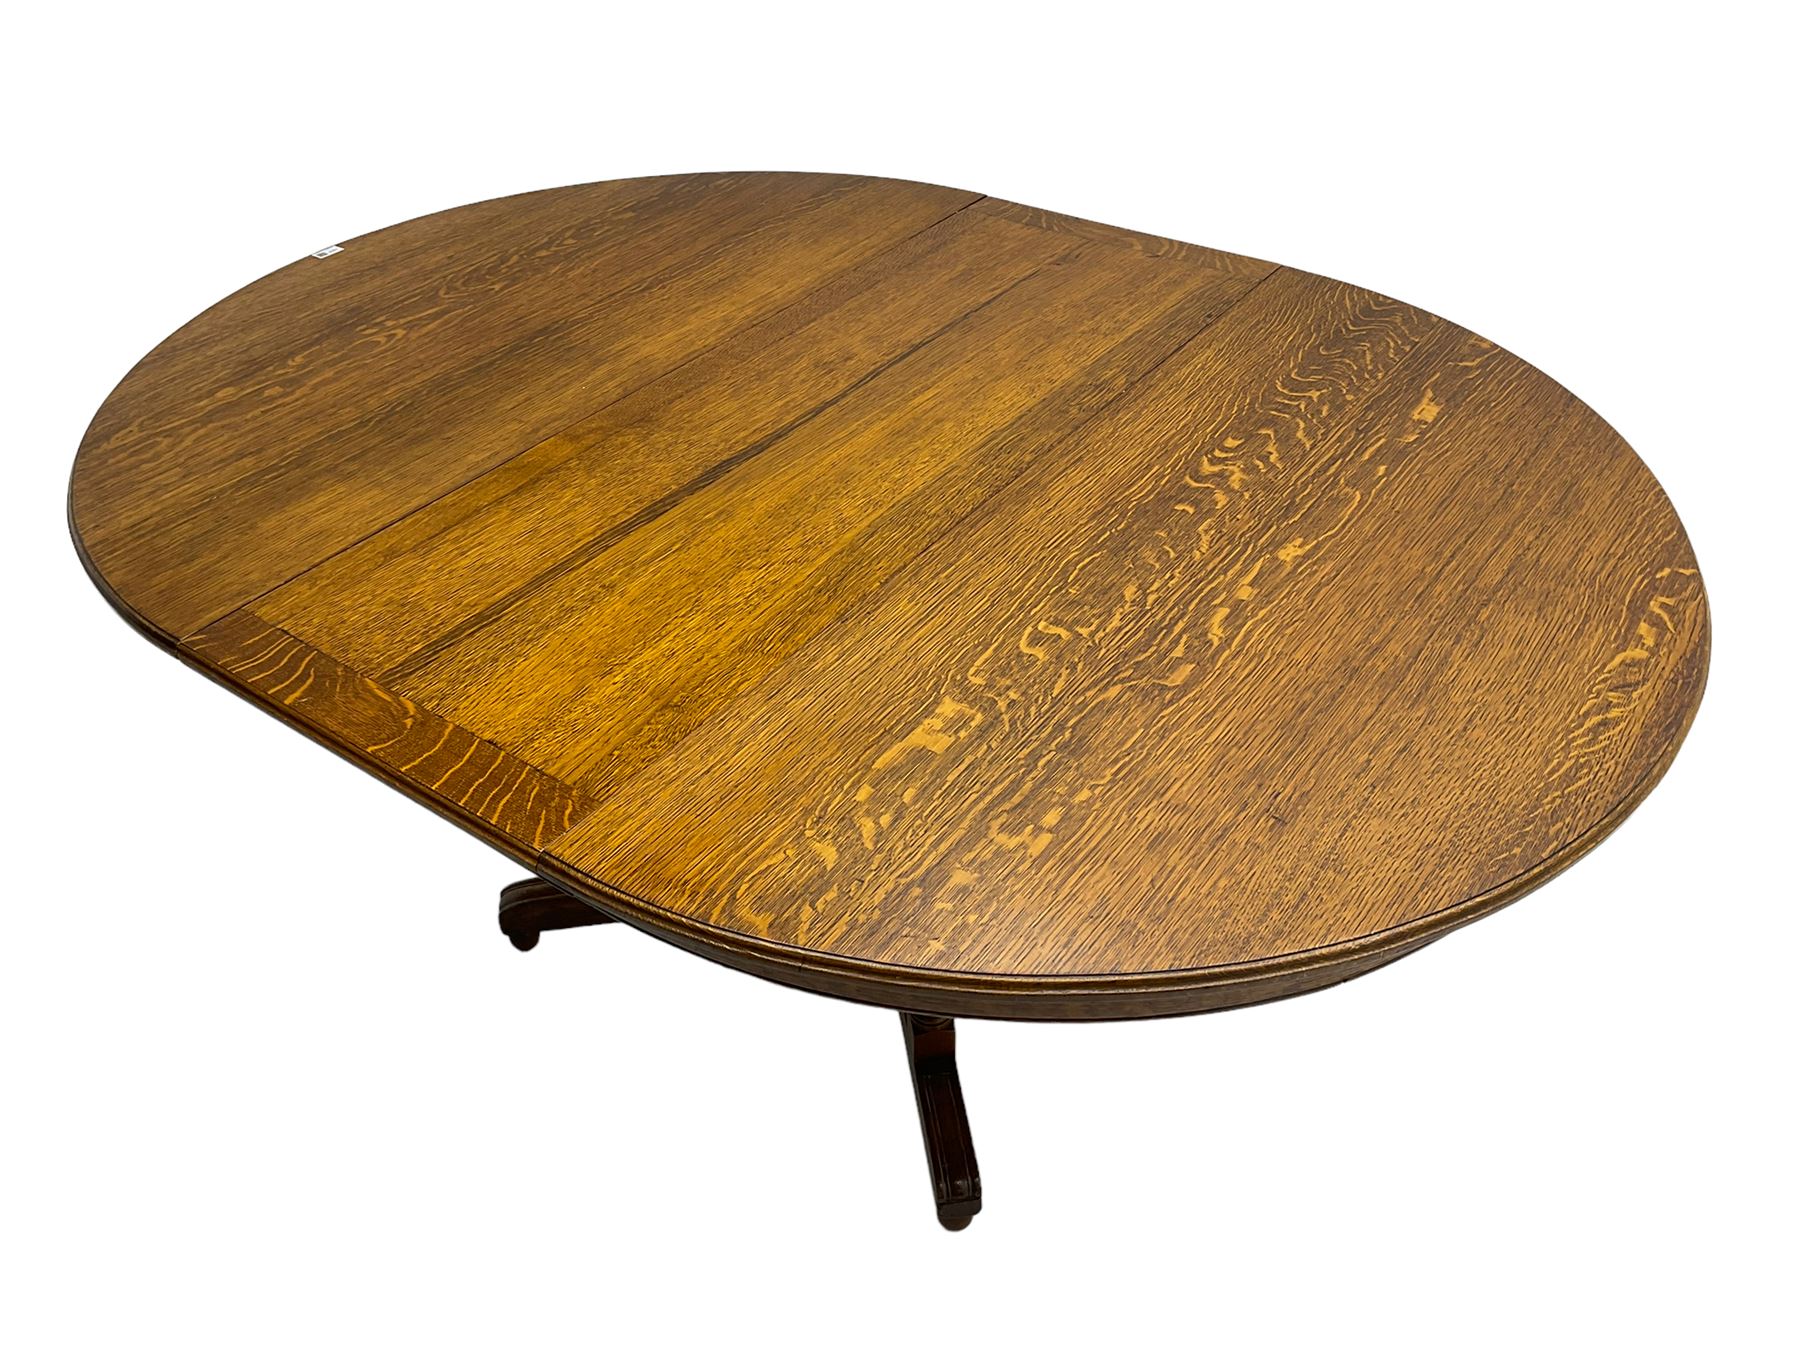 Early 20th century oak dining table - Image 2 of 8